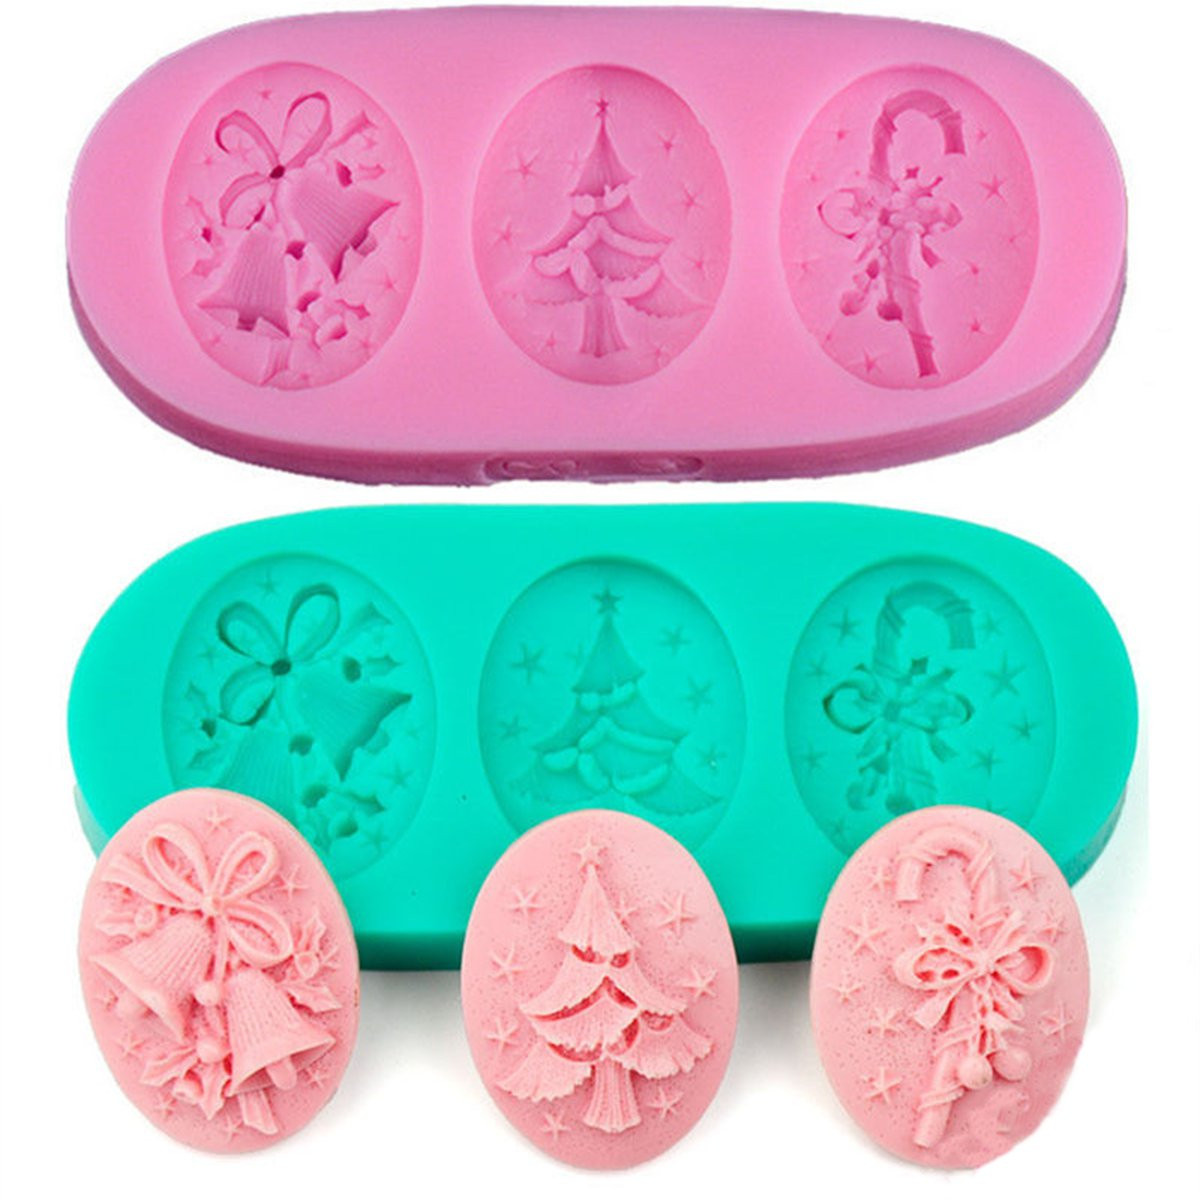 

Christmas Tree Silicone Fondant Cake Mold Soap Chocolate Candy Decorating Mould